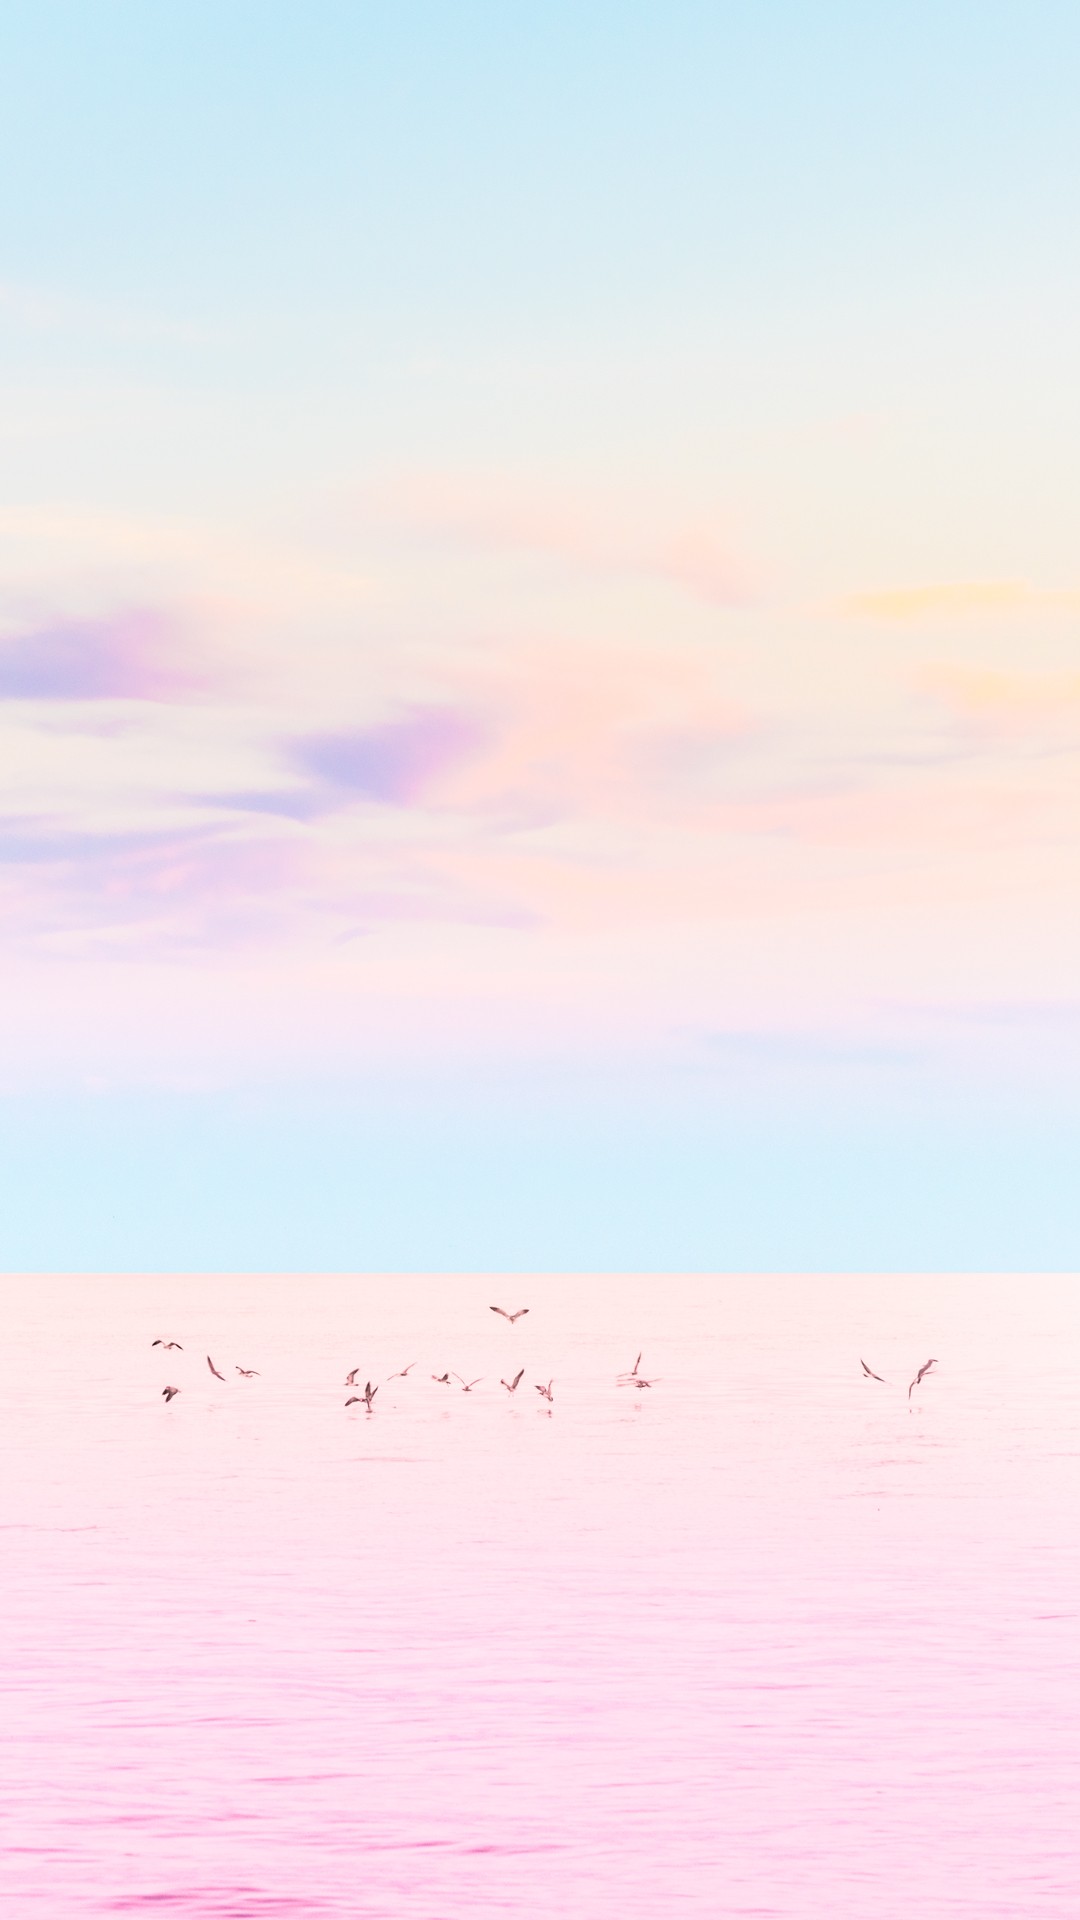 Pastel wallpaper ·① Download free amazing full HD backgrounds for